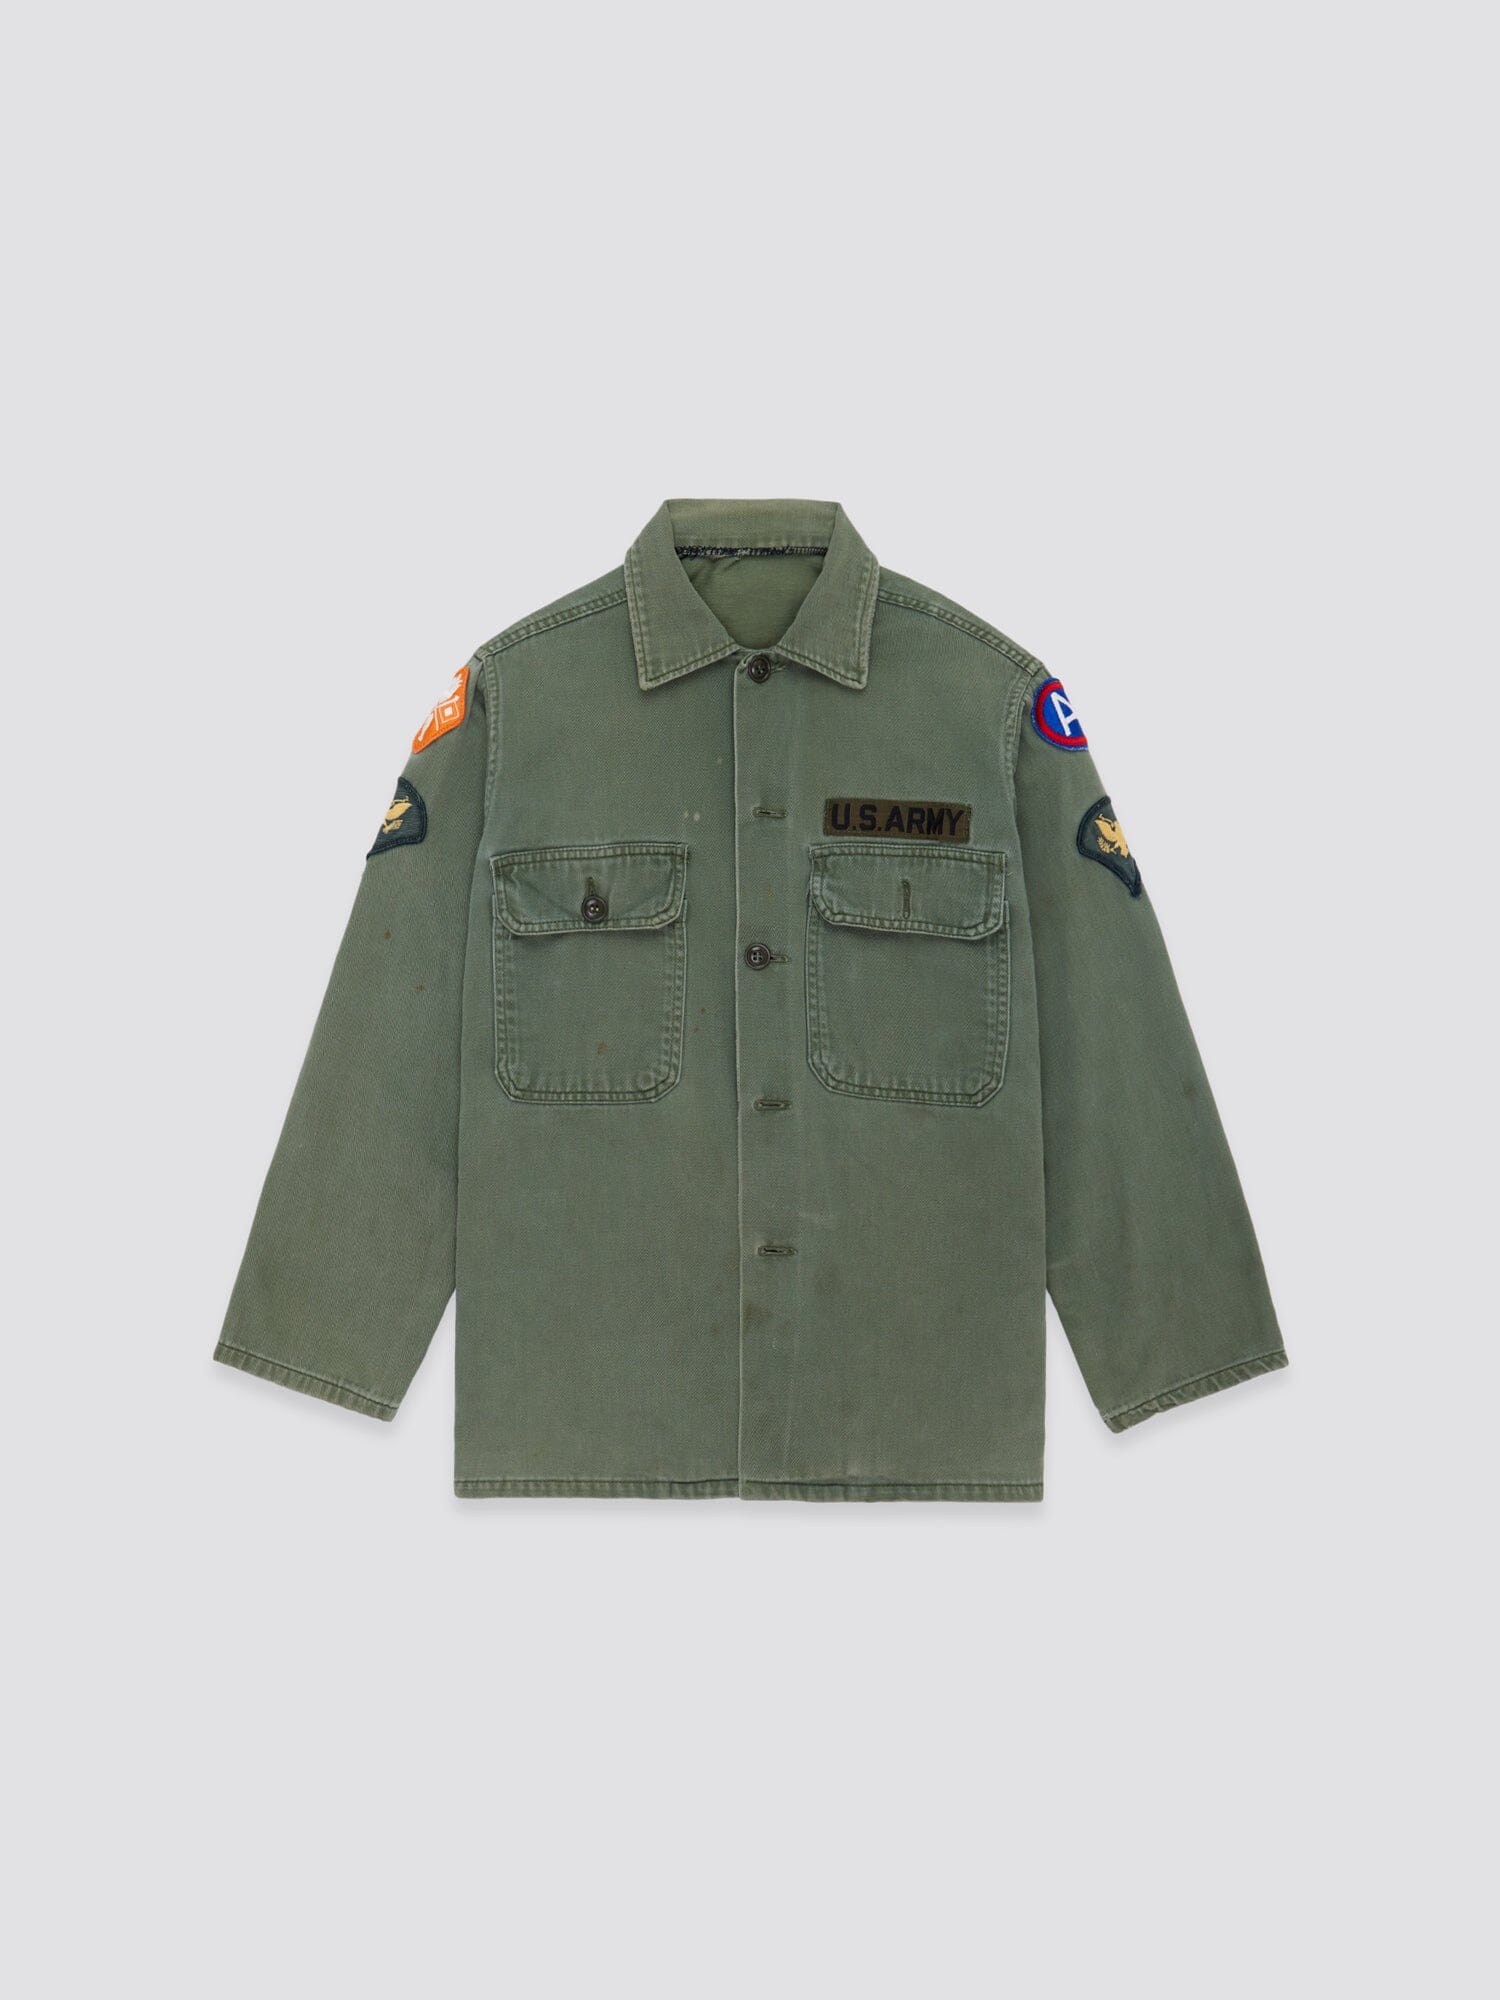 US ARMY SHIRT 3RD ARMY TOP Alpha Industries OLIVE M 